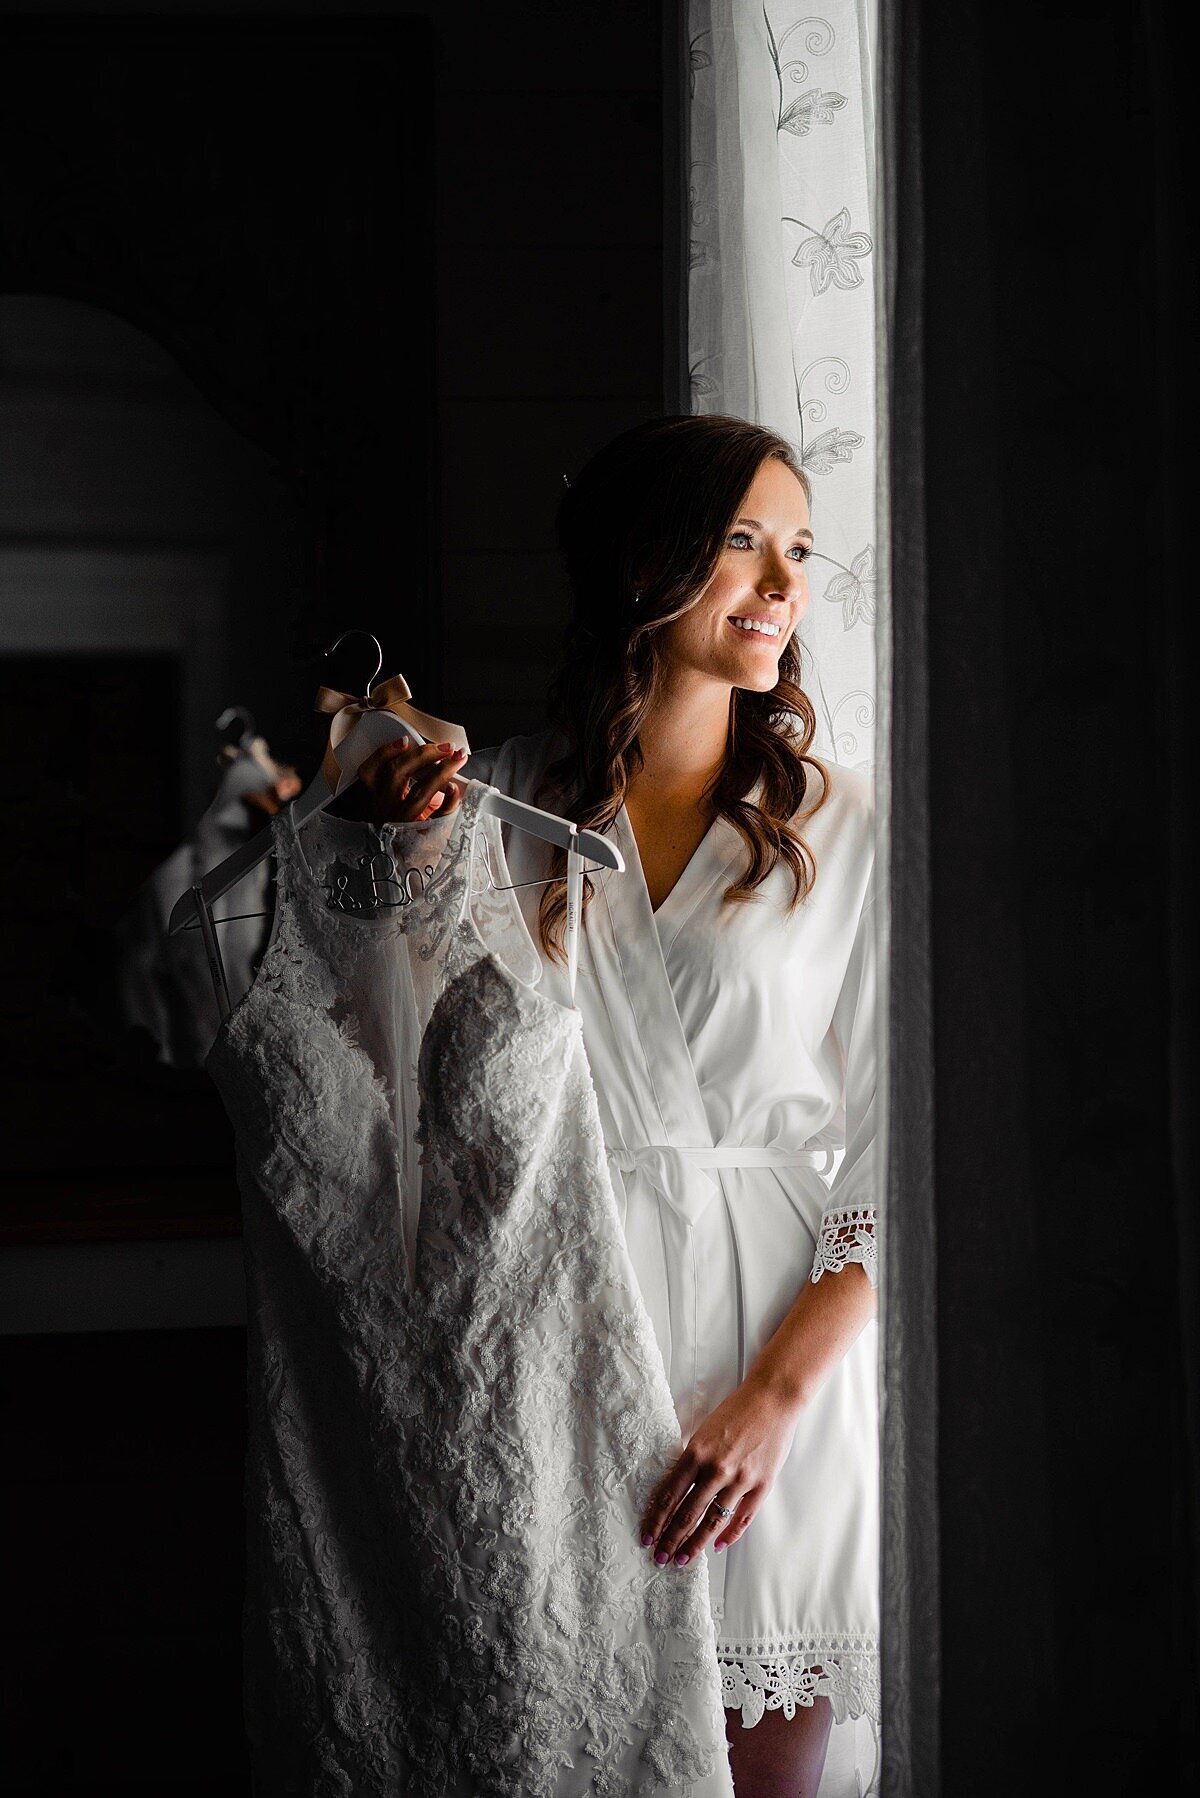 Bride holding dress while looking out the window